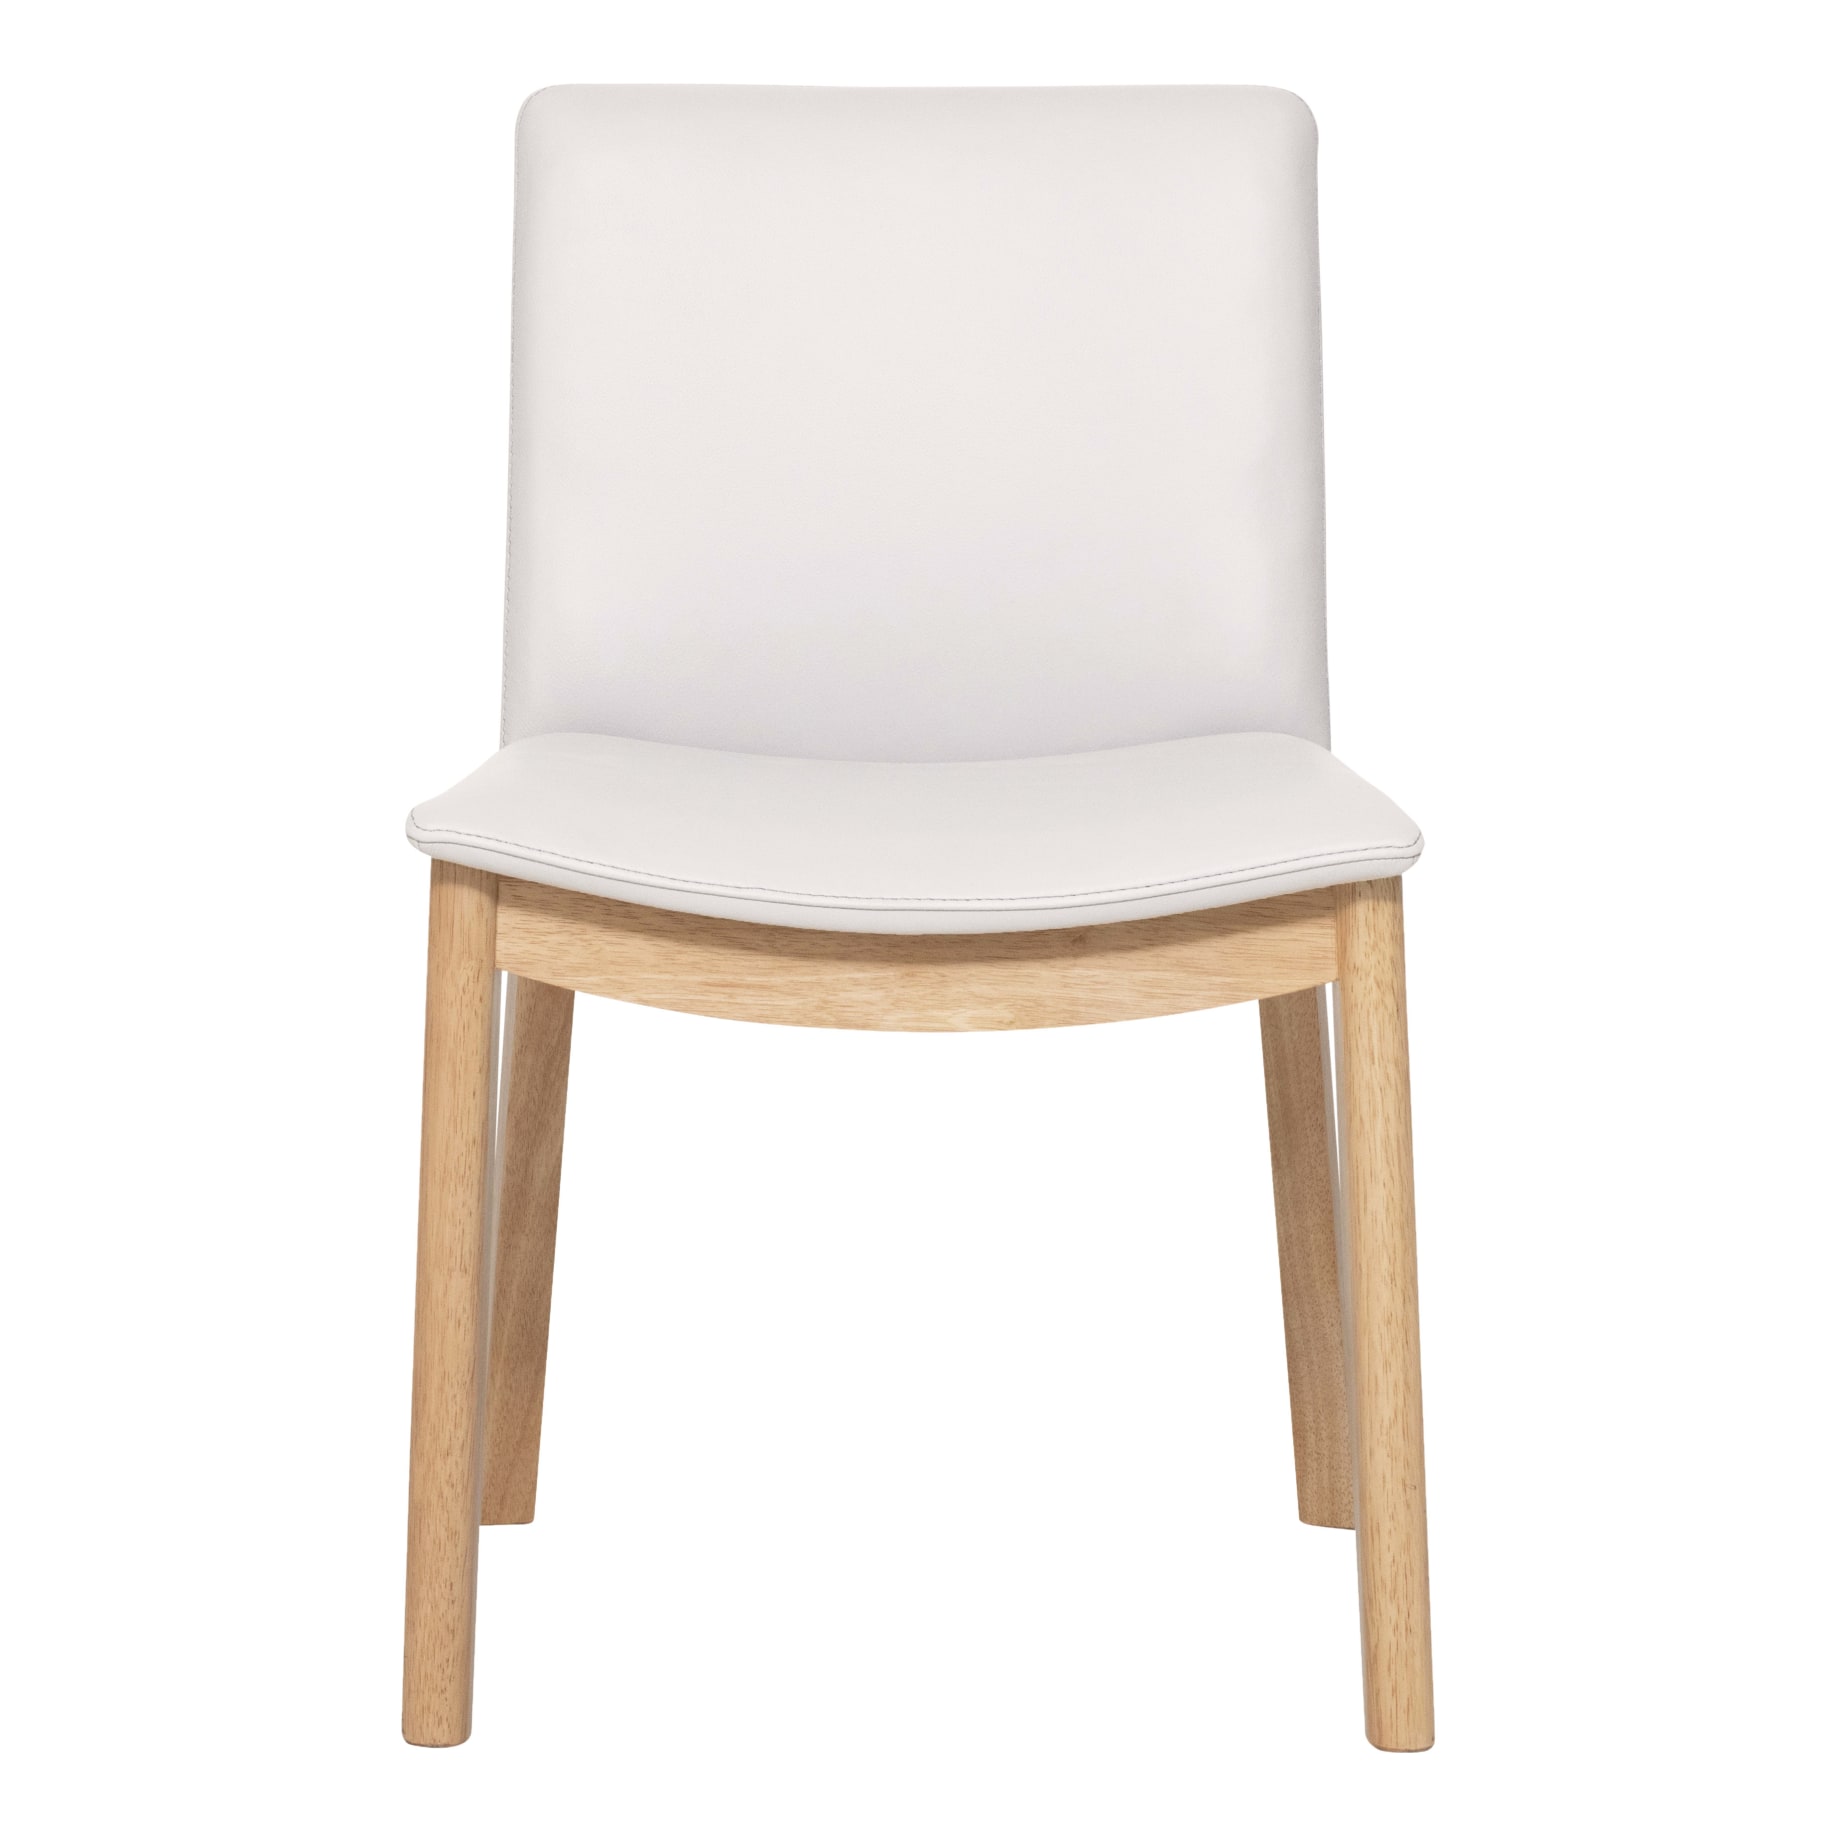 Everest Dining Chair in White Leather / Oak Stain